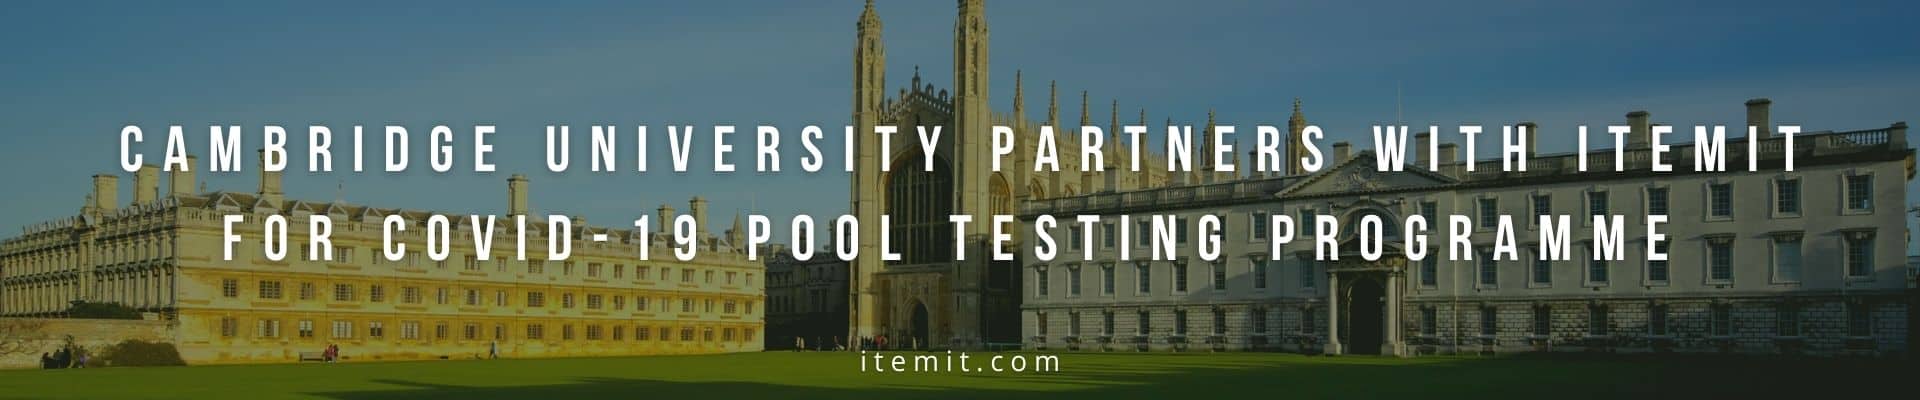 Cambridge University Partners With itemit For COVID-19 Pool Testing Programme